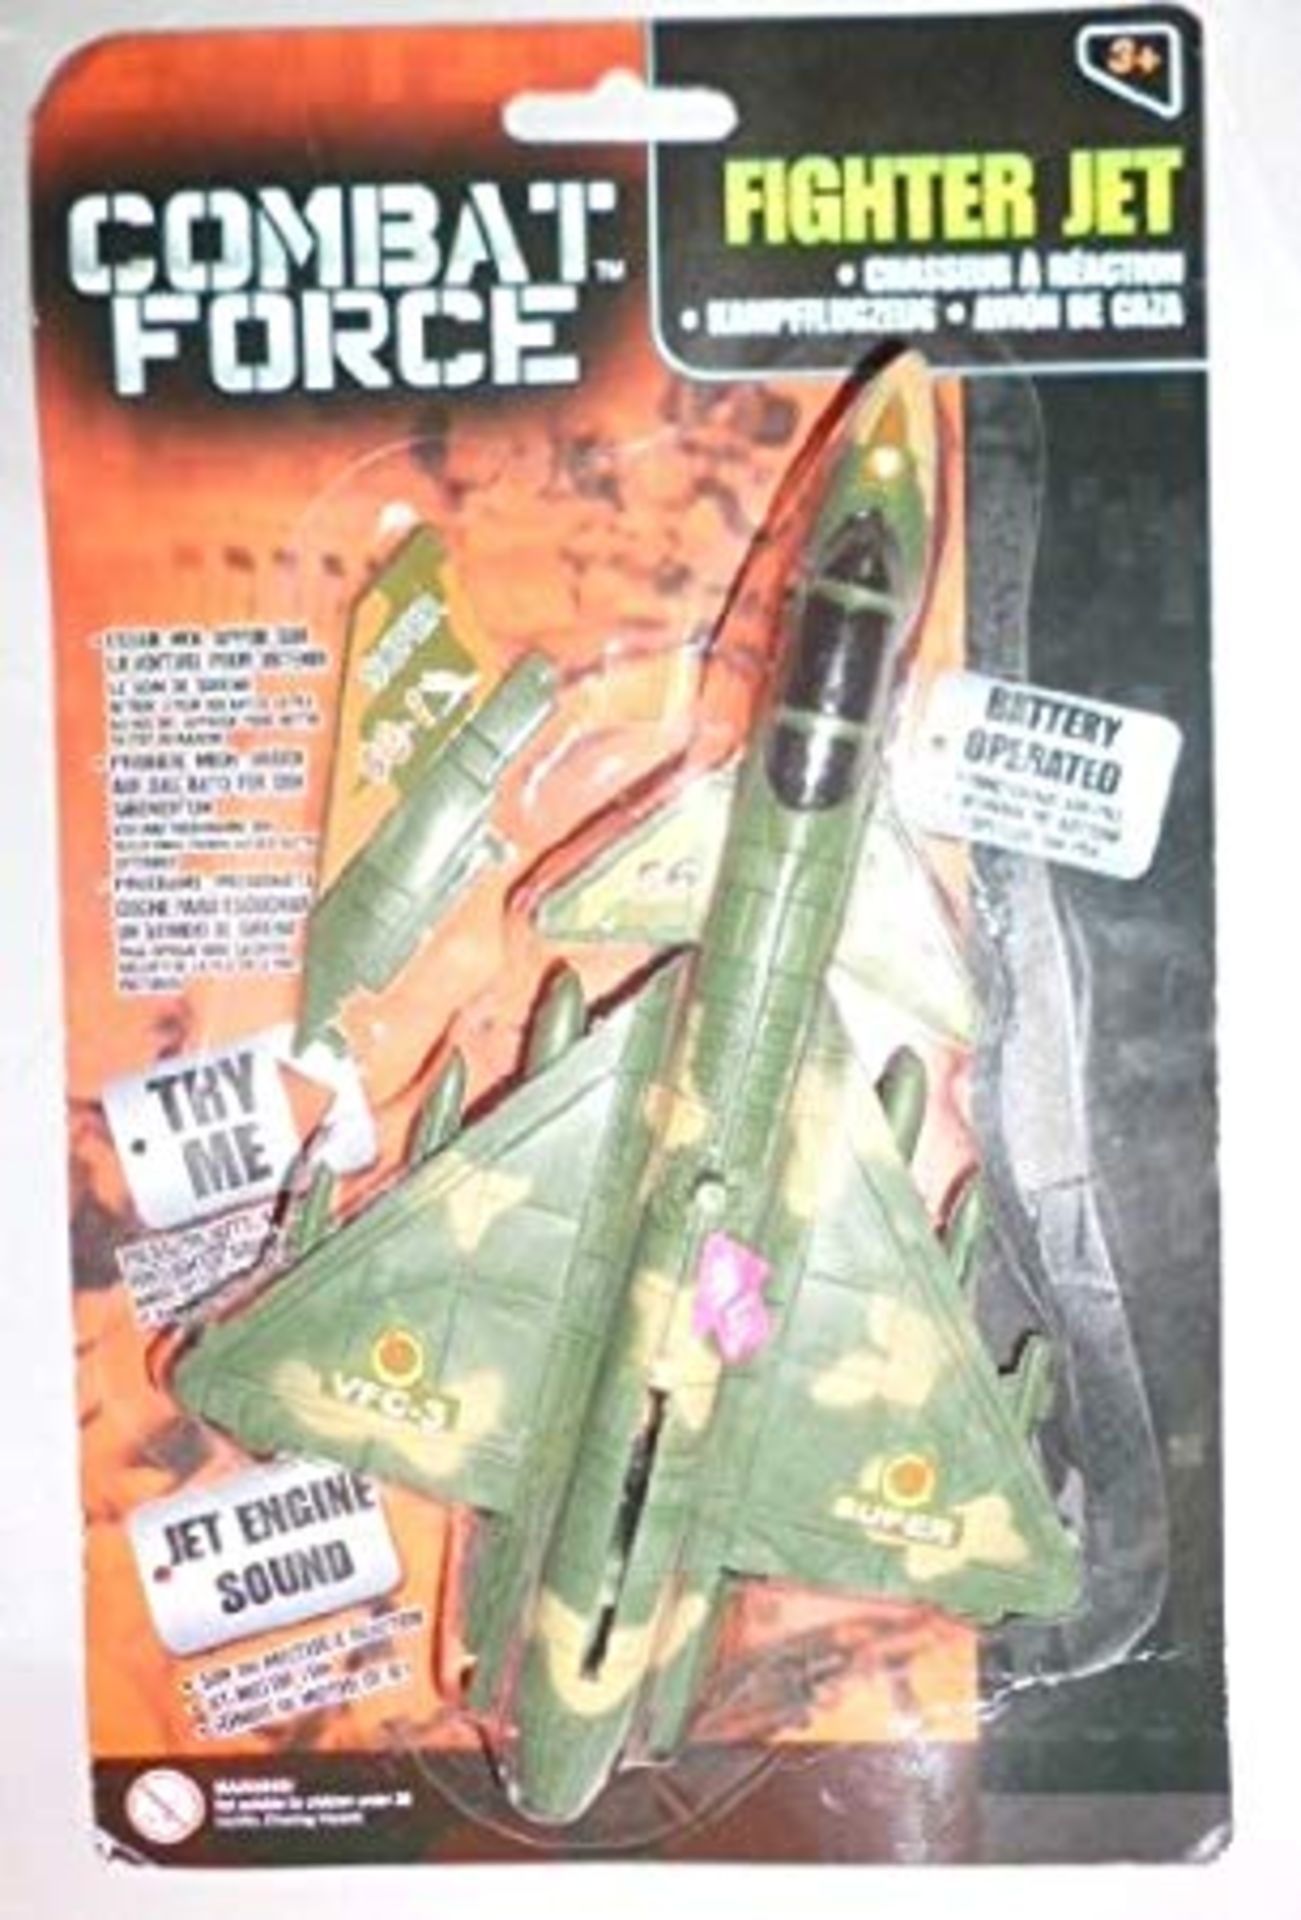 1 BOXED COMBAT FORCE FIGHTER JET (VIEWING AVAILABLE)